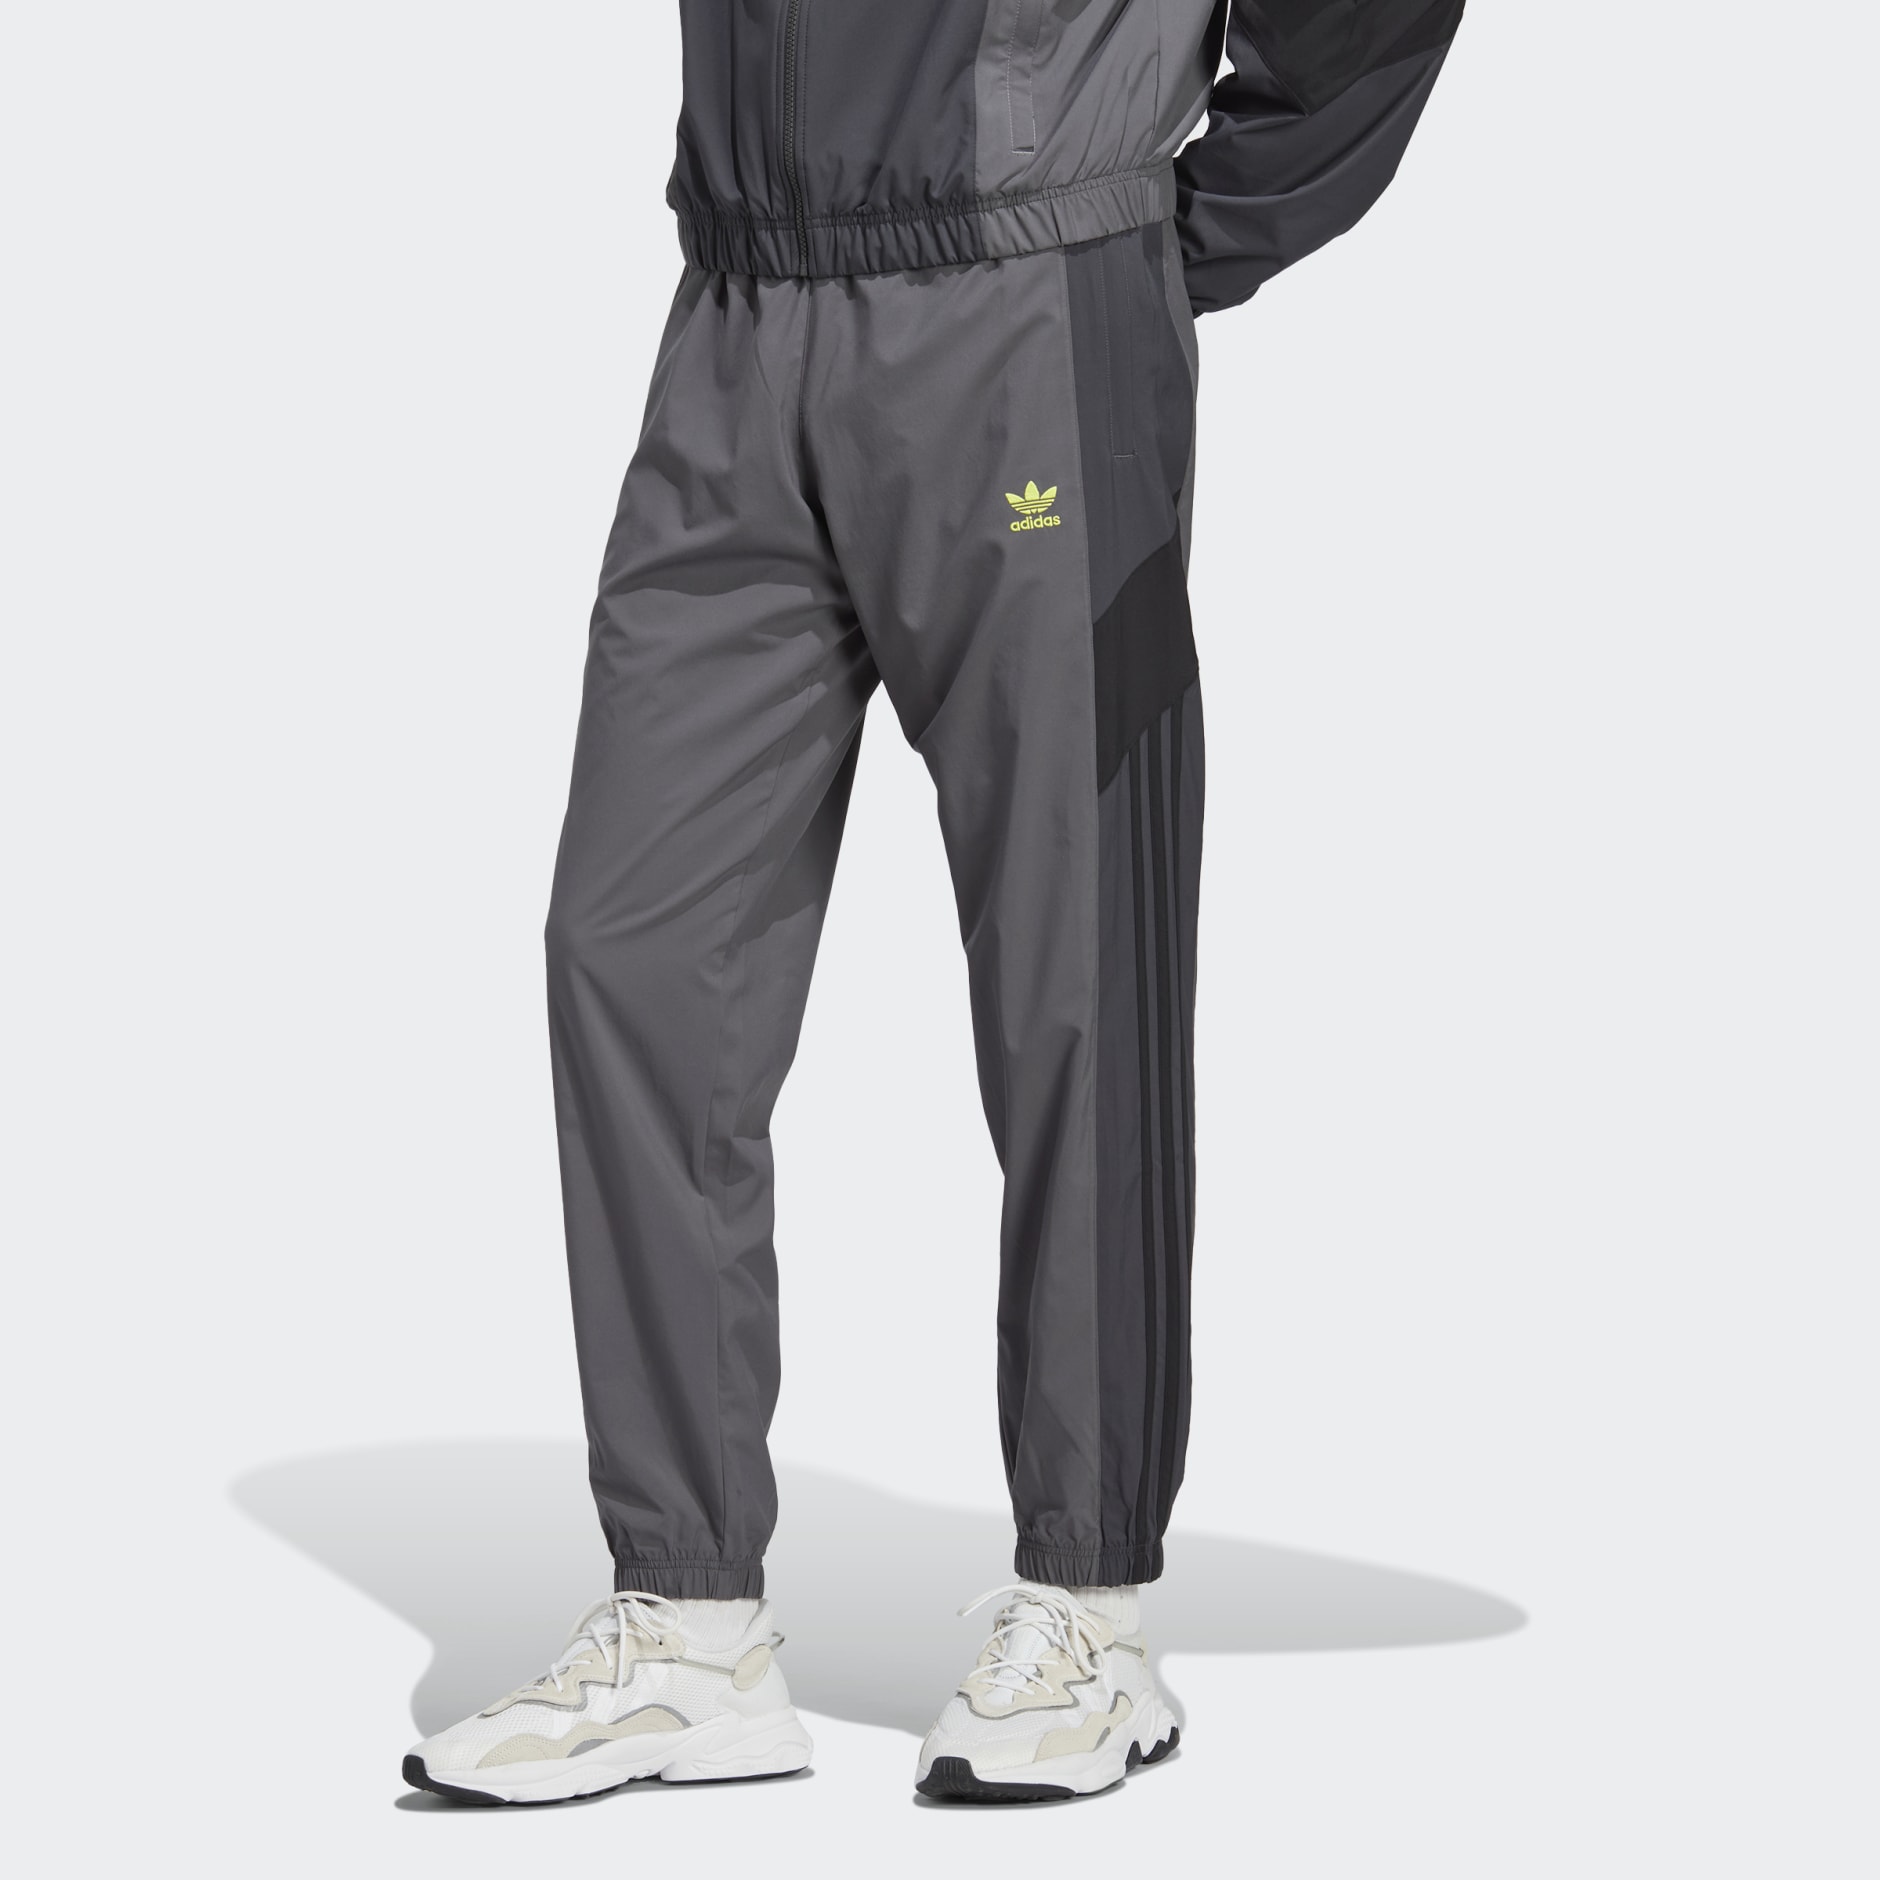 Under Armour Legacy Woven Pants | SportsDirect.com USA